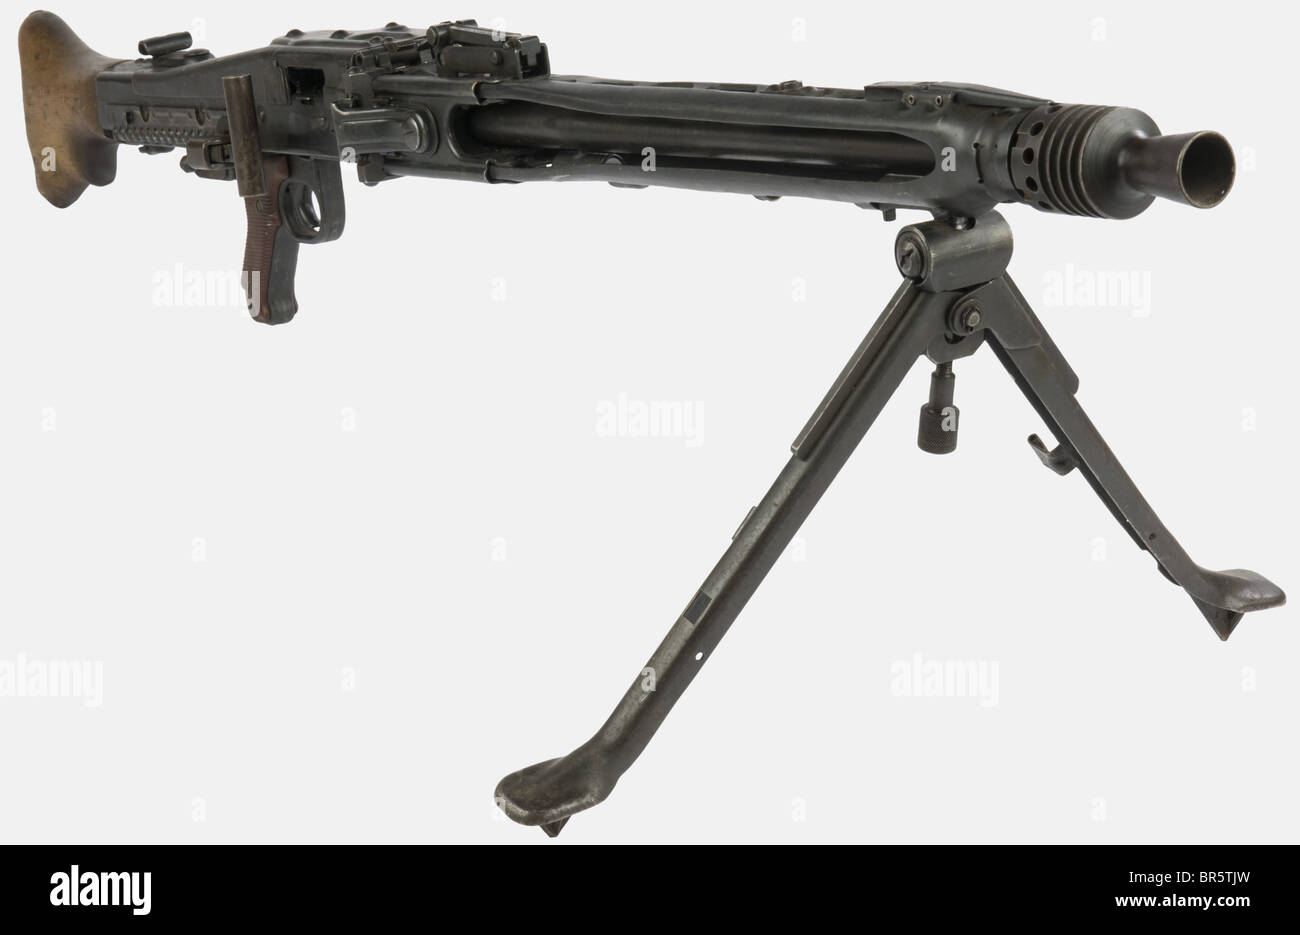 A German MG 42 machine gun, calibre 7,92 x 57, serial number 5044, stamped "dfb". Arsenal-restored machine gun (post-war) and reblued, with a bipod. historic, historical, 1930s, 20th century, gun, guns, firearm, fire arm, firearms, fire arms, weapons, arms, weapon, arm, fighting device, object, objects, stills, clipping, clippings, cut out, cut-out, cut-outs, military, militaria, piece of equipment, Stock Photo